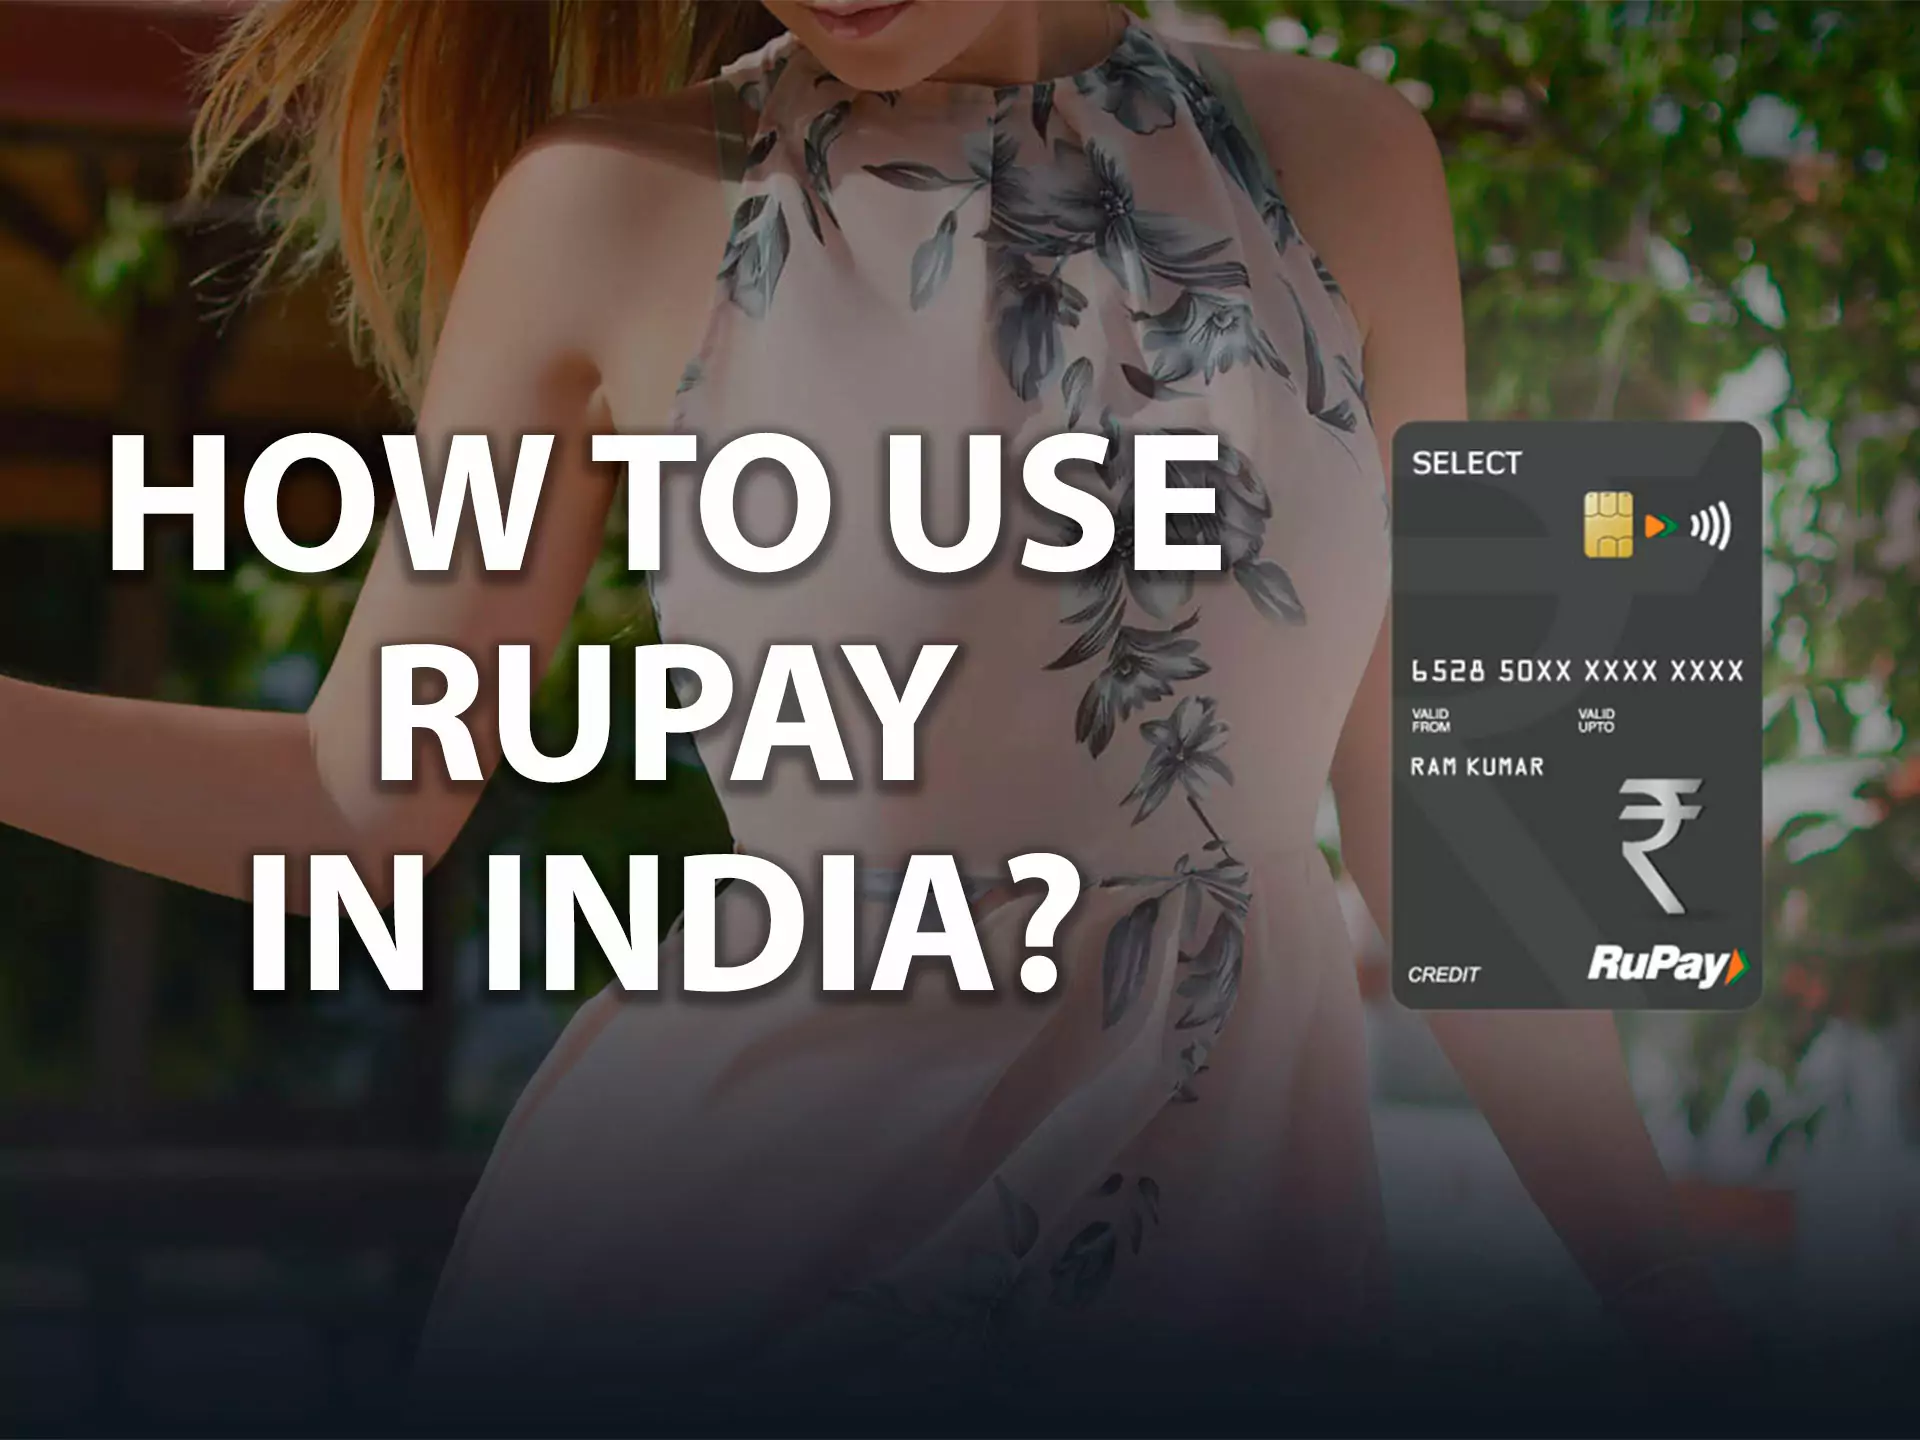 You can request for th RuPay card in your bank and make easy transactions.